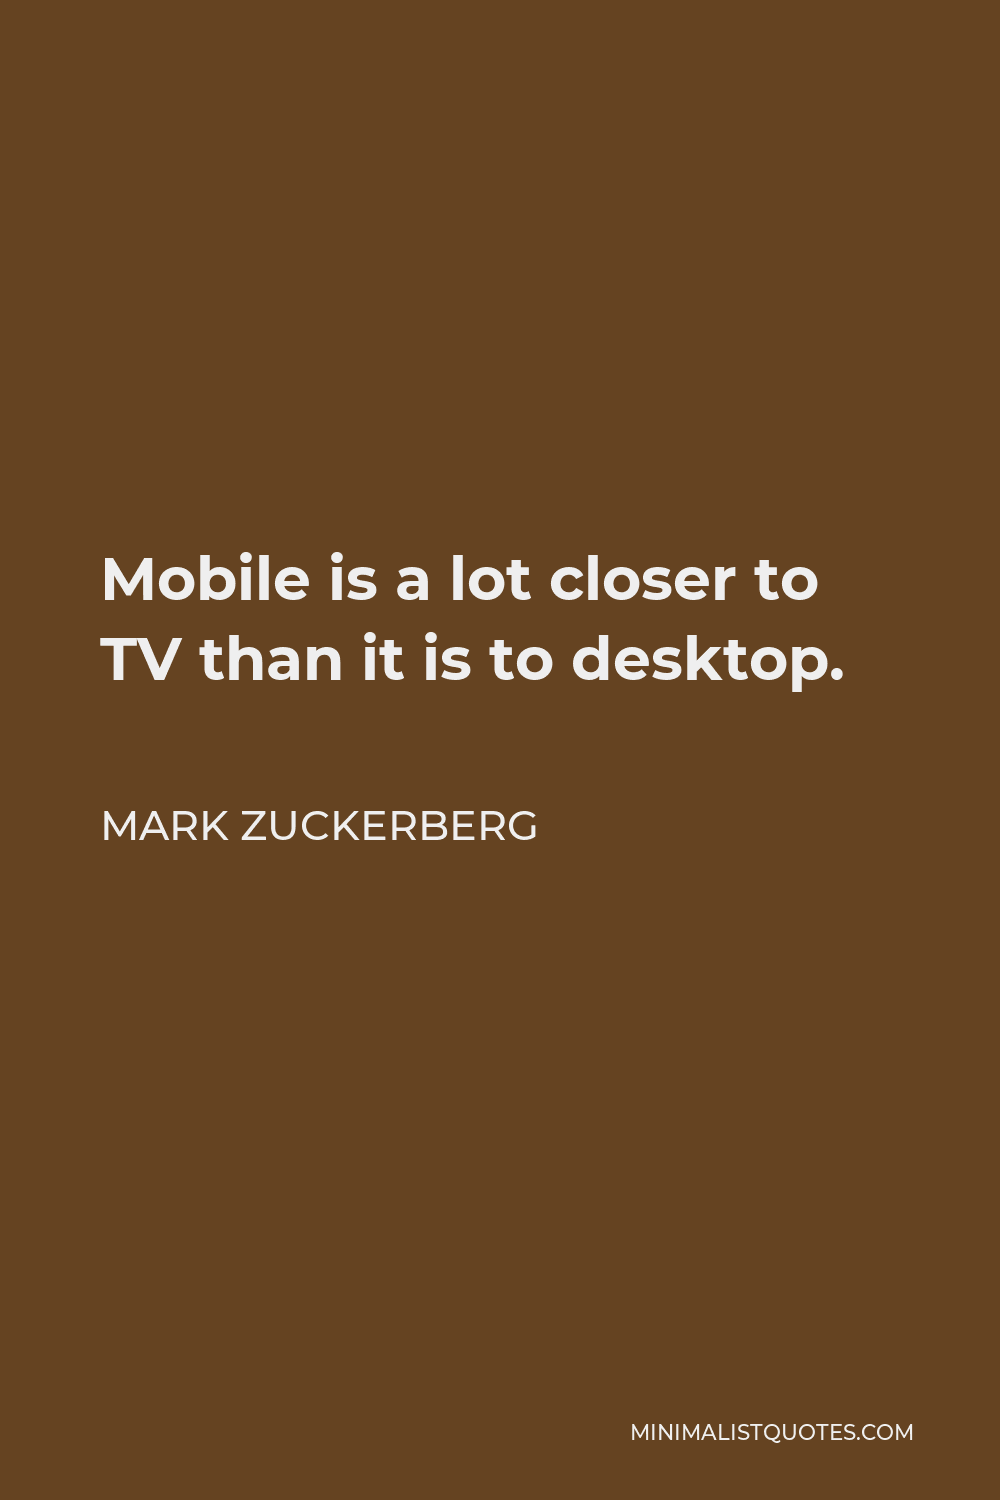 Mark Zuckerberg Quote - Mobile is a lot closer to TV than it is to desktop.